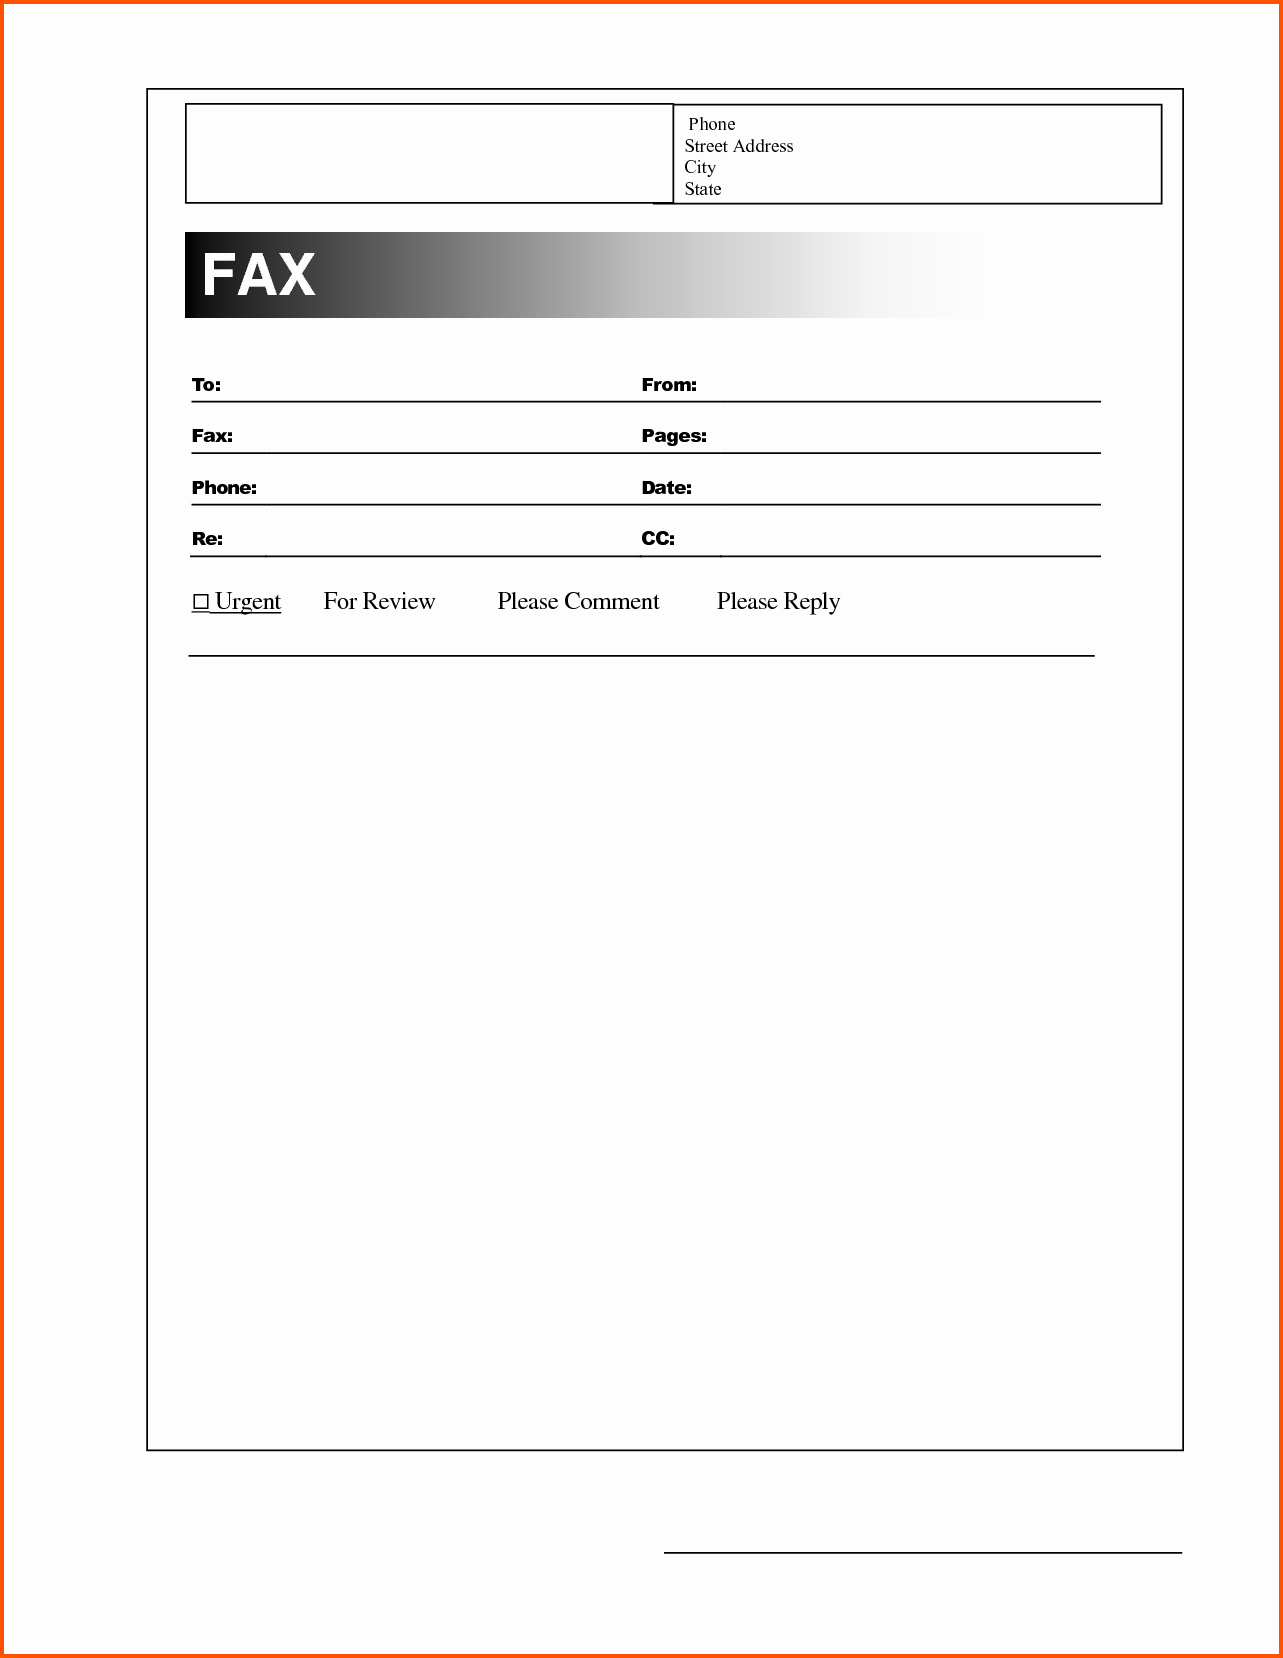 Fax Cover Sheet for Word New Fax Sheet format Gidiyedformapolitica